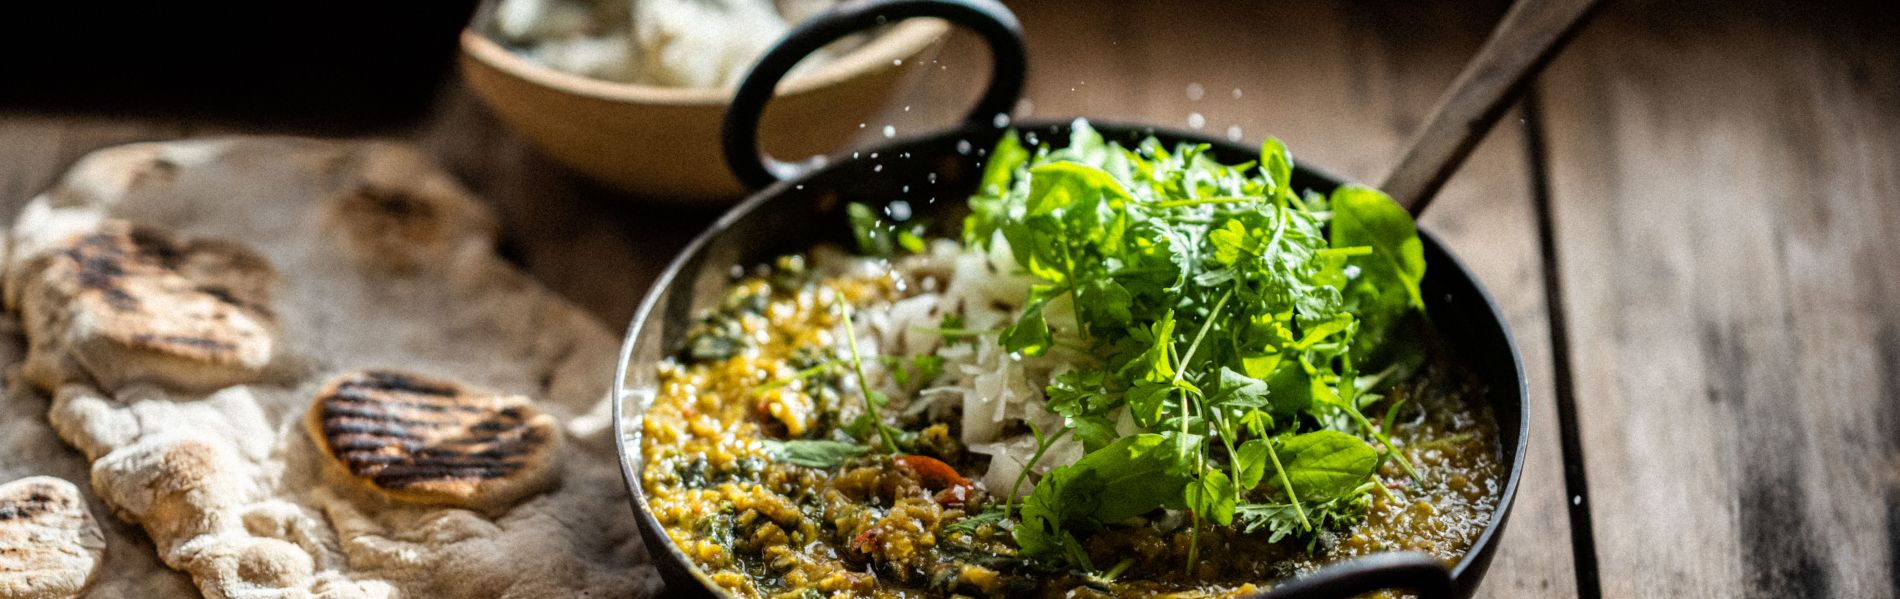 Gill Meller's Lentil Dhal with kale and chard recipe